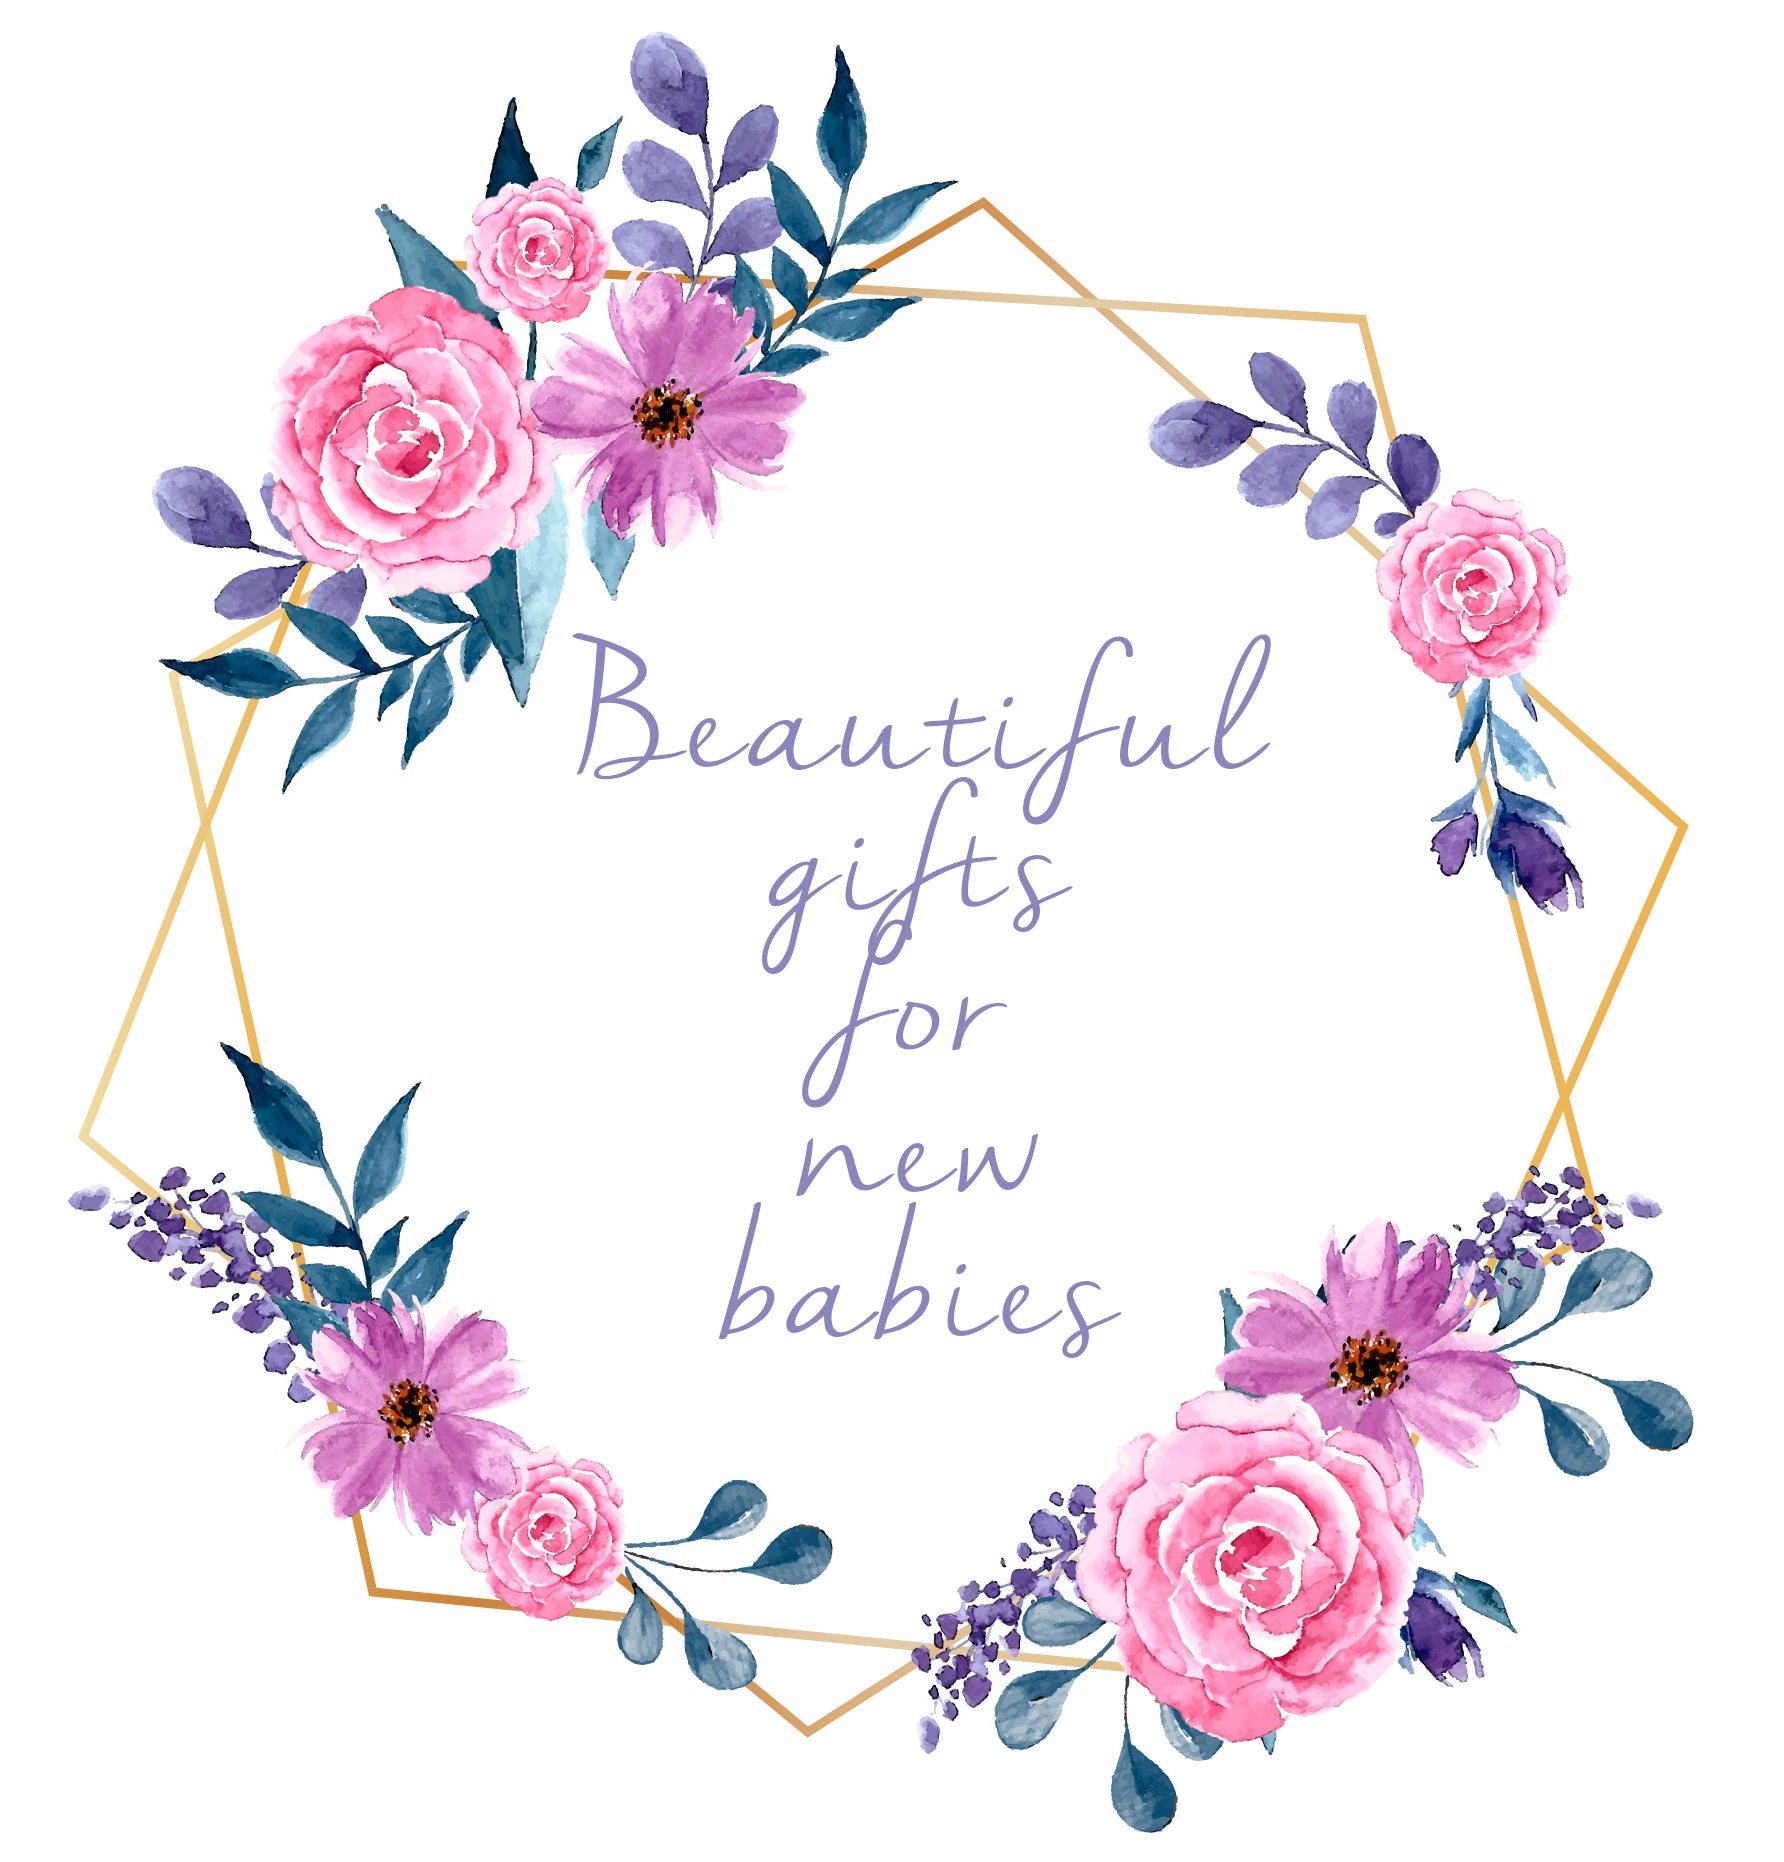 Beautiful gifts for new babies